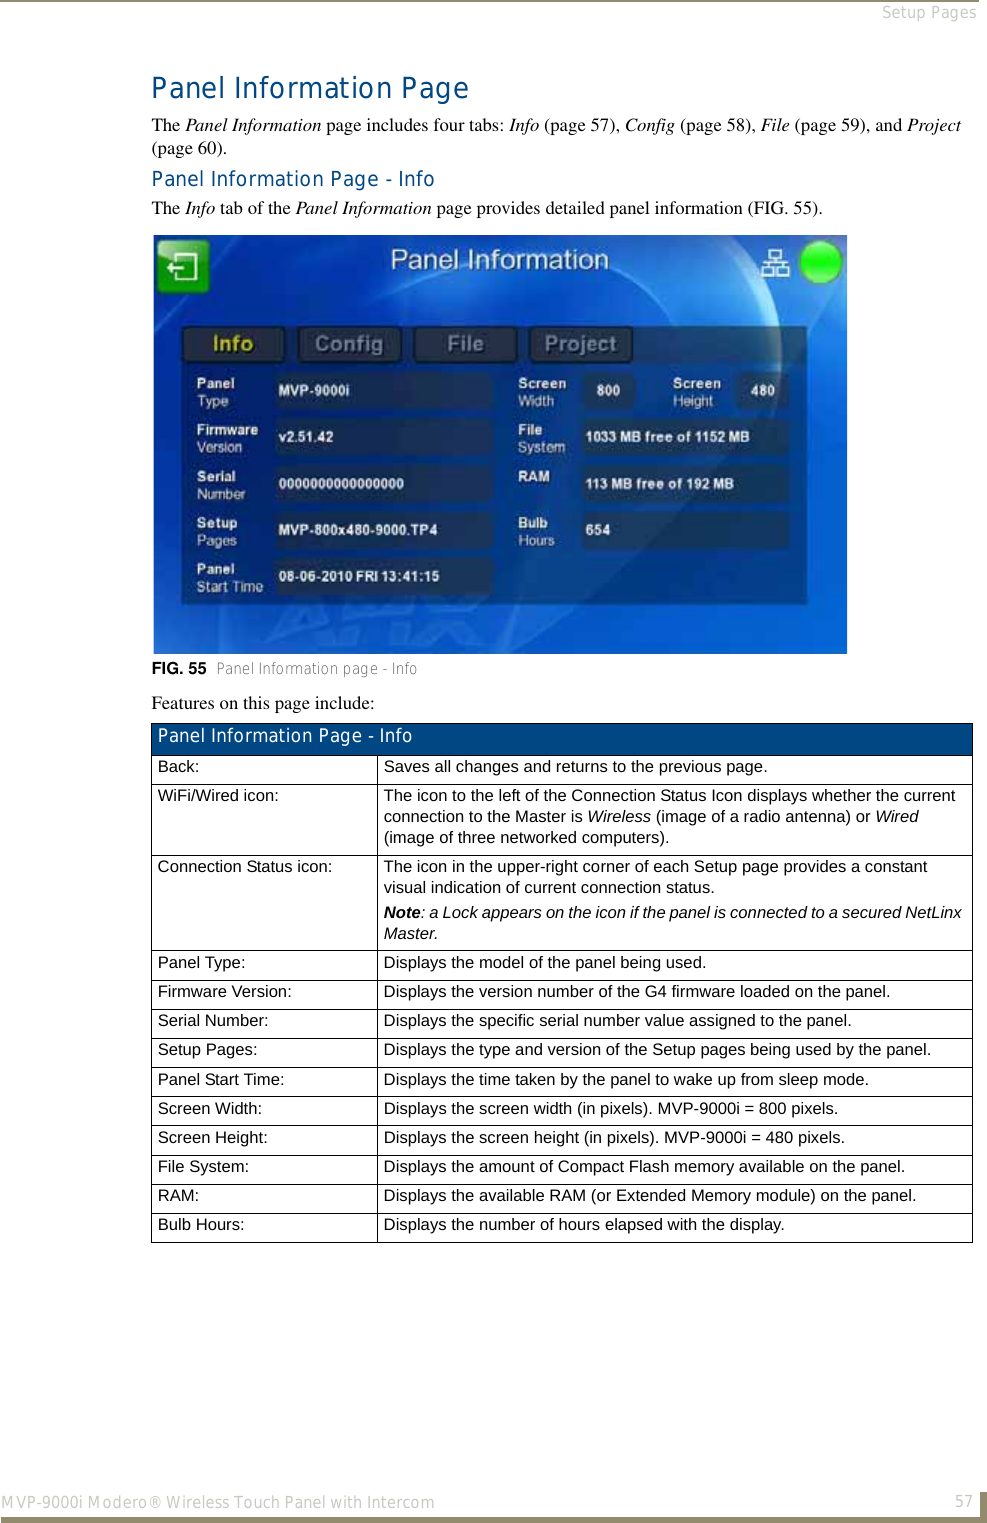 Setup Pages57MVP-9000i Modero® Wireless Touch Panel with IntercomPanel Information PageThe Panel Information page includes four tabs: Info (page 57), Config (page 58), File (page 59), and Project (page 60).Panel Information Page - InfoThe Info tab of the Panel Information page provides detailed panel information (FIG. 55).  Features on this page include:  FIG. 55  Panel Information page - InfoPanel Information Page - Info Back: Saves all changes and returns to the previous page.WiFi/Wired icon: The icon to the left of the Connection Status Icon displays whether the current connection to the Master is Wireless (image of a radio antenna) or Wired (image of three networked computers).Connection Status icon: The icon in the upper-right corner of each Setup page provides a constant visual indication of current connection status.Note: a Lock appears on the icon if the panel is connected to a secured NetLinx Master.Panel Type: Displays the model of the panel being used.Firmware Version: Displays the version number of the G4 firmware loaded on the panel.Serial Number: Displays the specific serial number value assigned to the panel.Setup Pages: Displays the type and version of the Setup pages being used by the panel.Panel Start Time: Displays the time taken by the panel to wake up from sleep mode.Screen Width: Displays the screen width (in pixels). MVP-9000i = 800 pixels.Screen Height: Displays the screen height (in pixels). MVP-9000i = 480 pixels.File System: Displays the amount of Compact Flash memory available on the panel.RAM: Displays the available RAM (or Extended Memory module) on the panel.Bulb Hours: Displays the number of hours elapsed with the display.